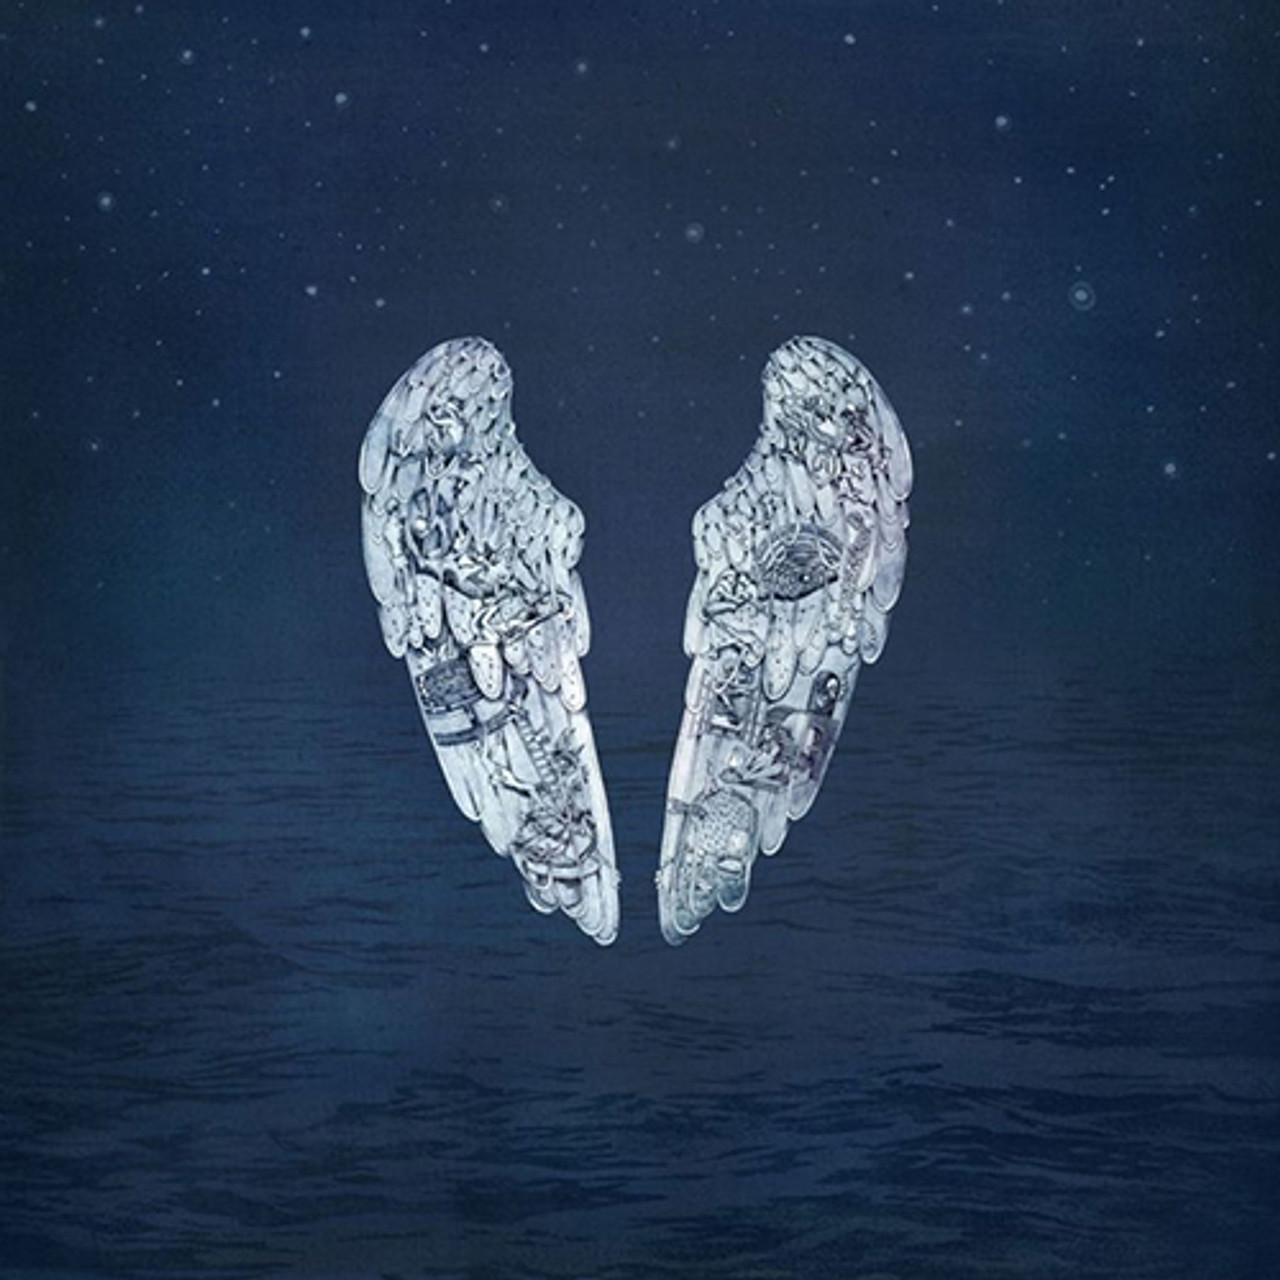 Coldplay - Ghost Stories (180G Vinyl LP) - Music Direct